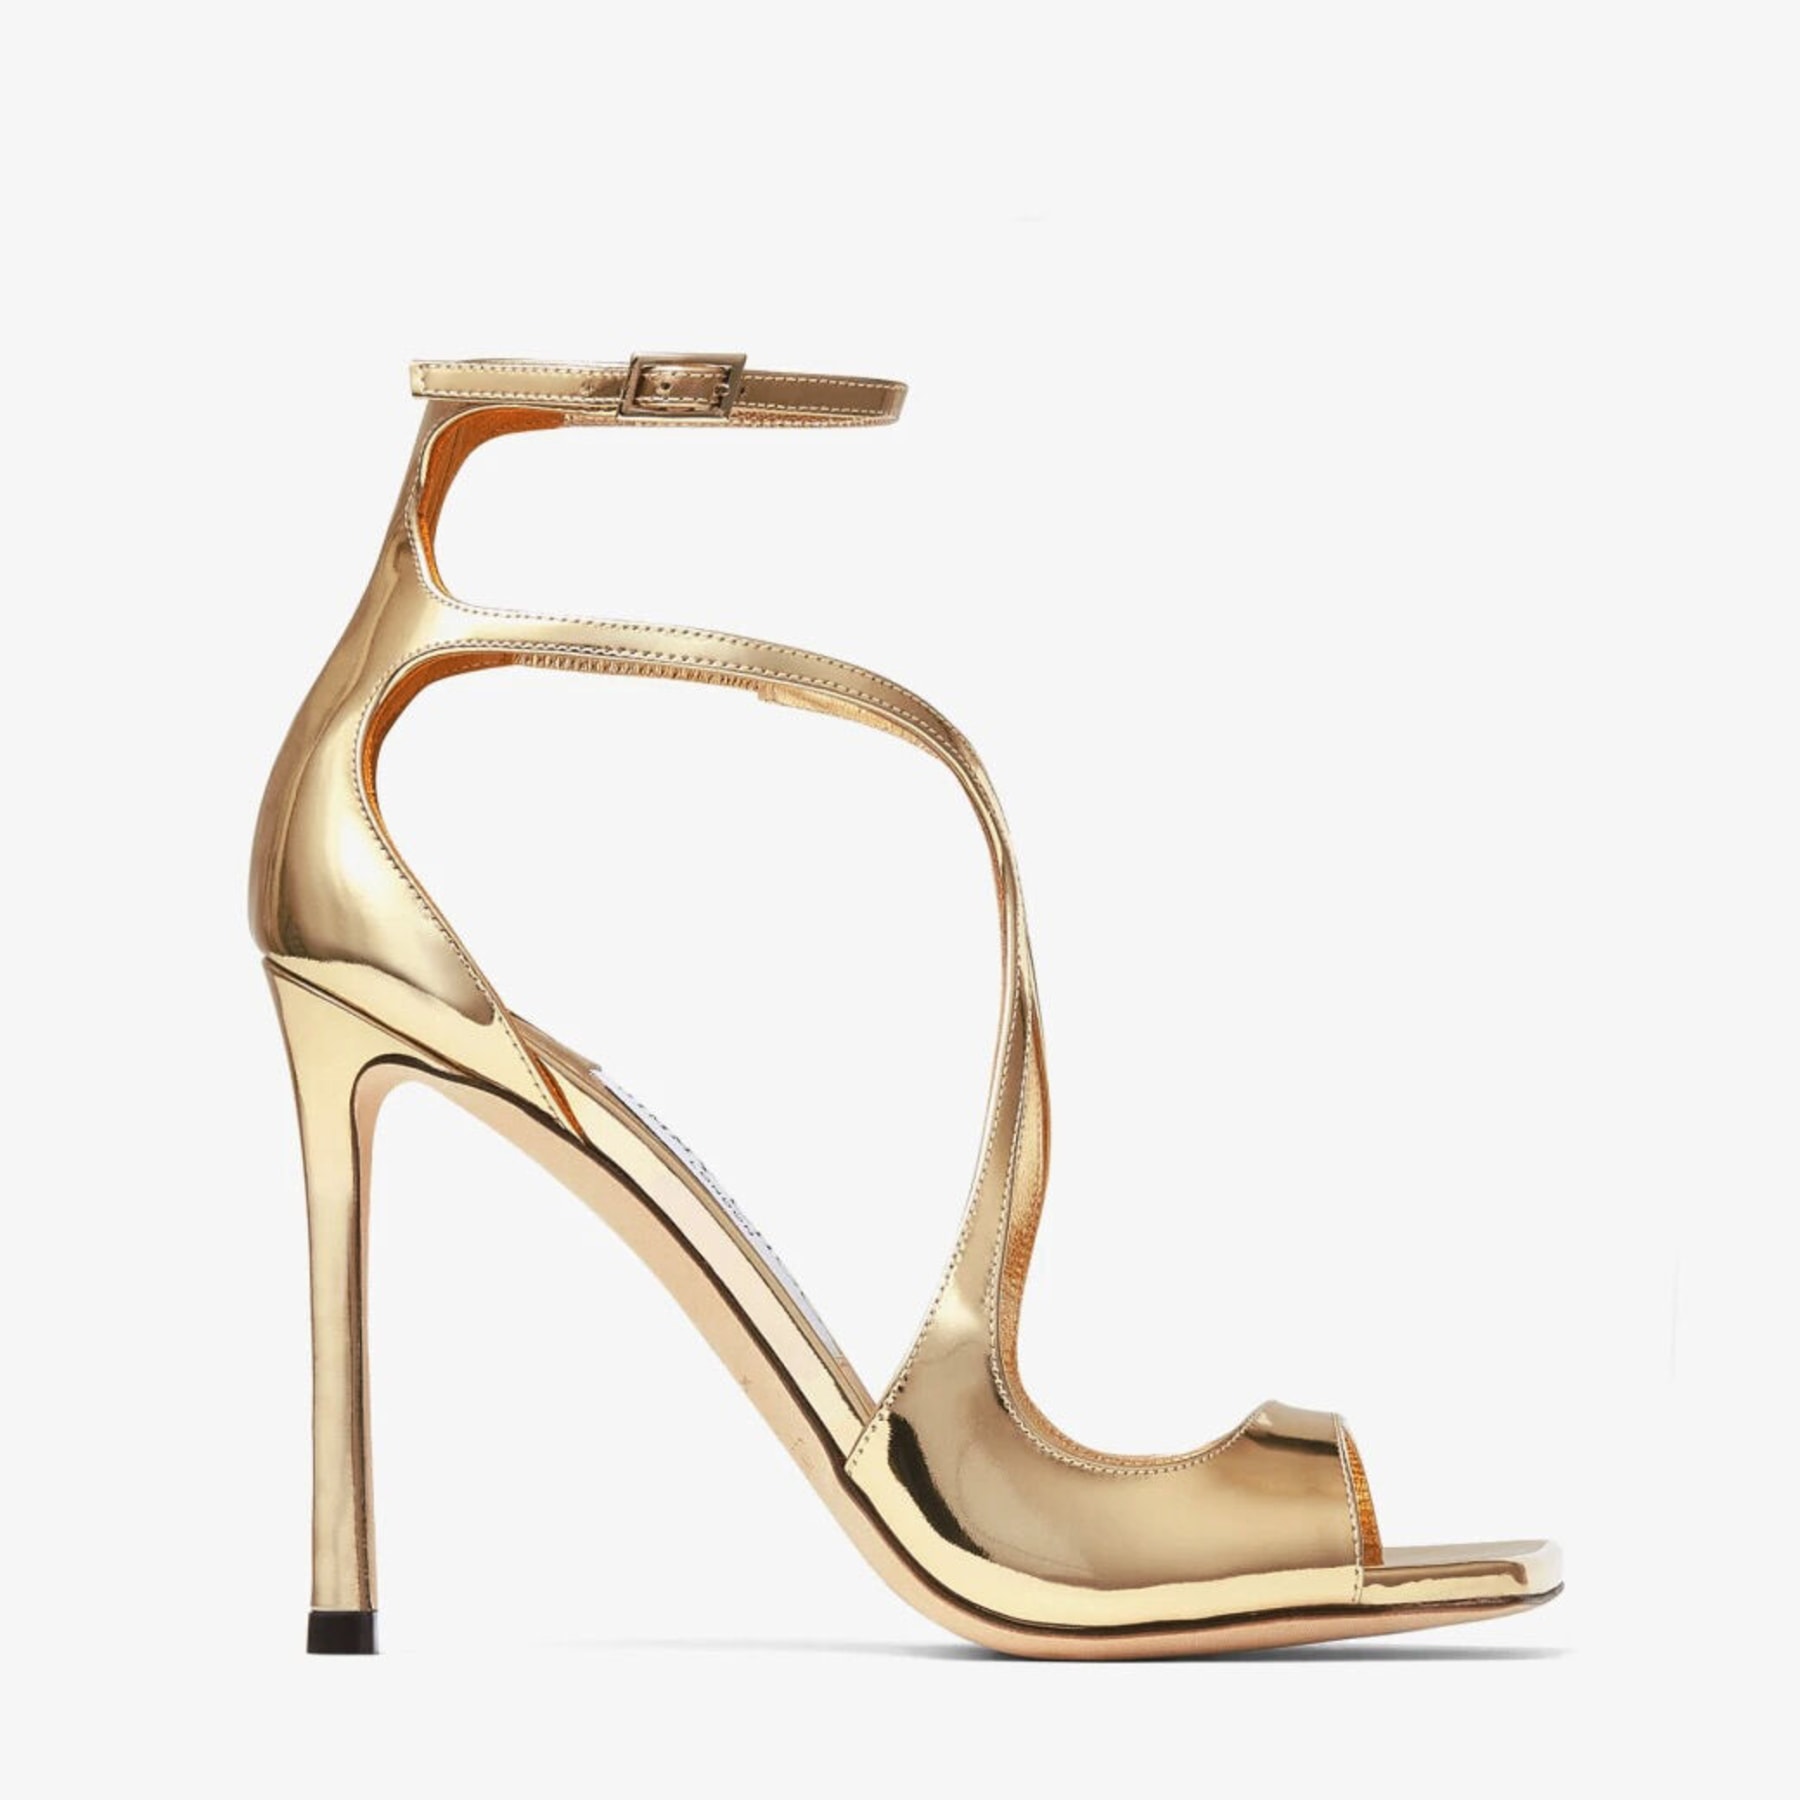 JIMMY CHOO - Official Online Boutique